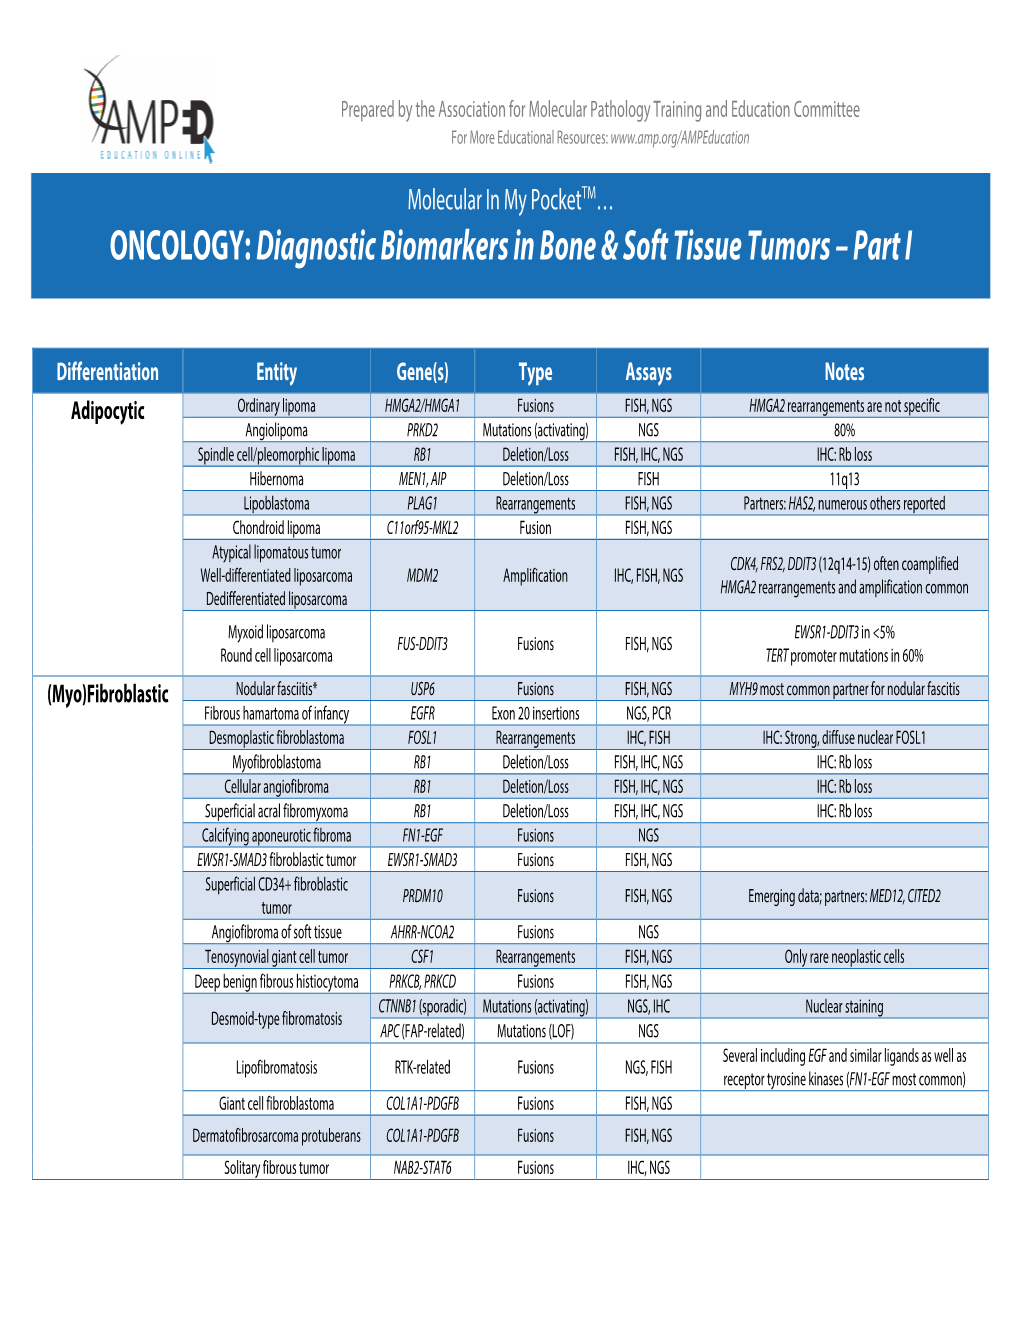 ONCOLOGY: Diagnostic Biomarkers in Bone & Soft Tissue Tumors – Part I